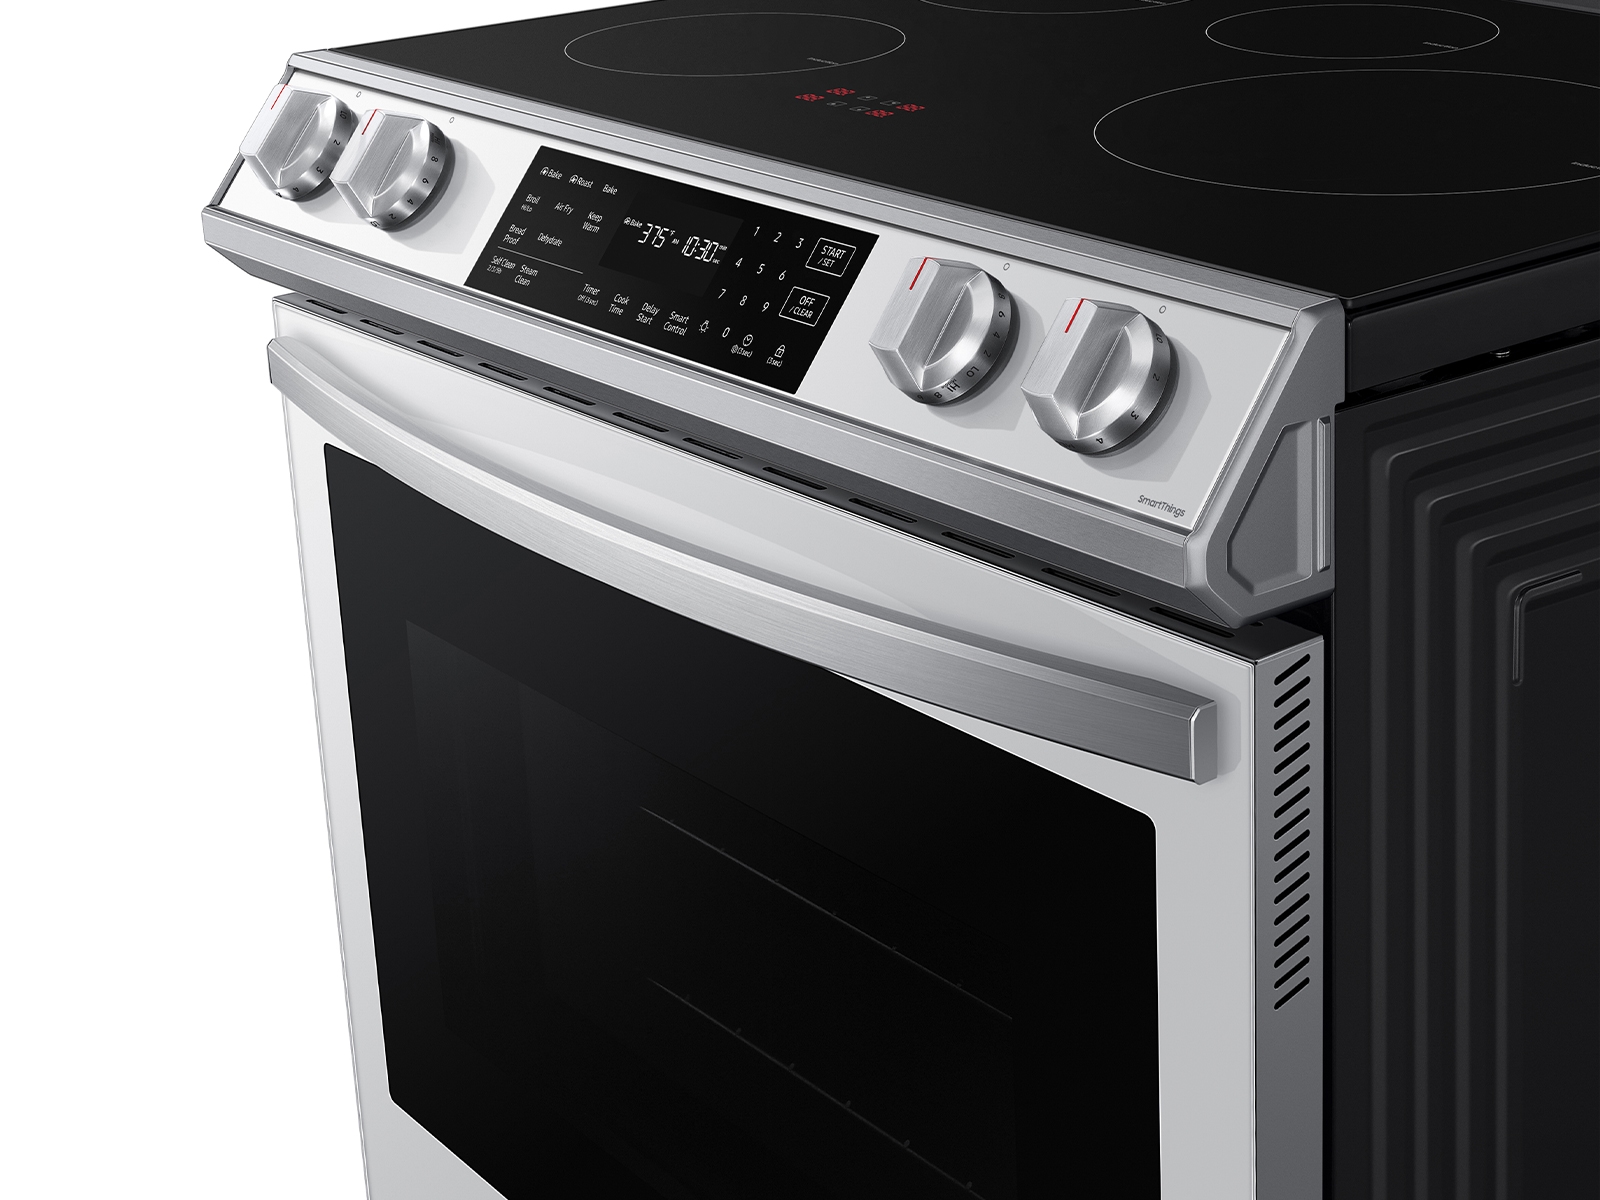 Thumbnail image of Bespoke 6.3 cu. ft. Smart Rapid Heat Induction Slide-in Range with Air Fry & Convection+ in White Glass